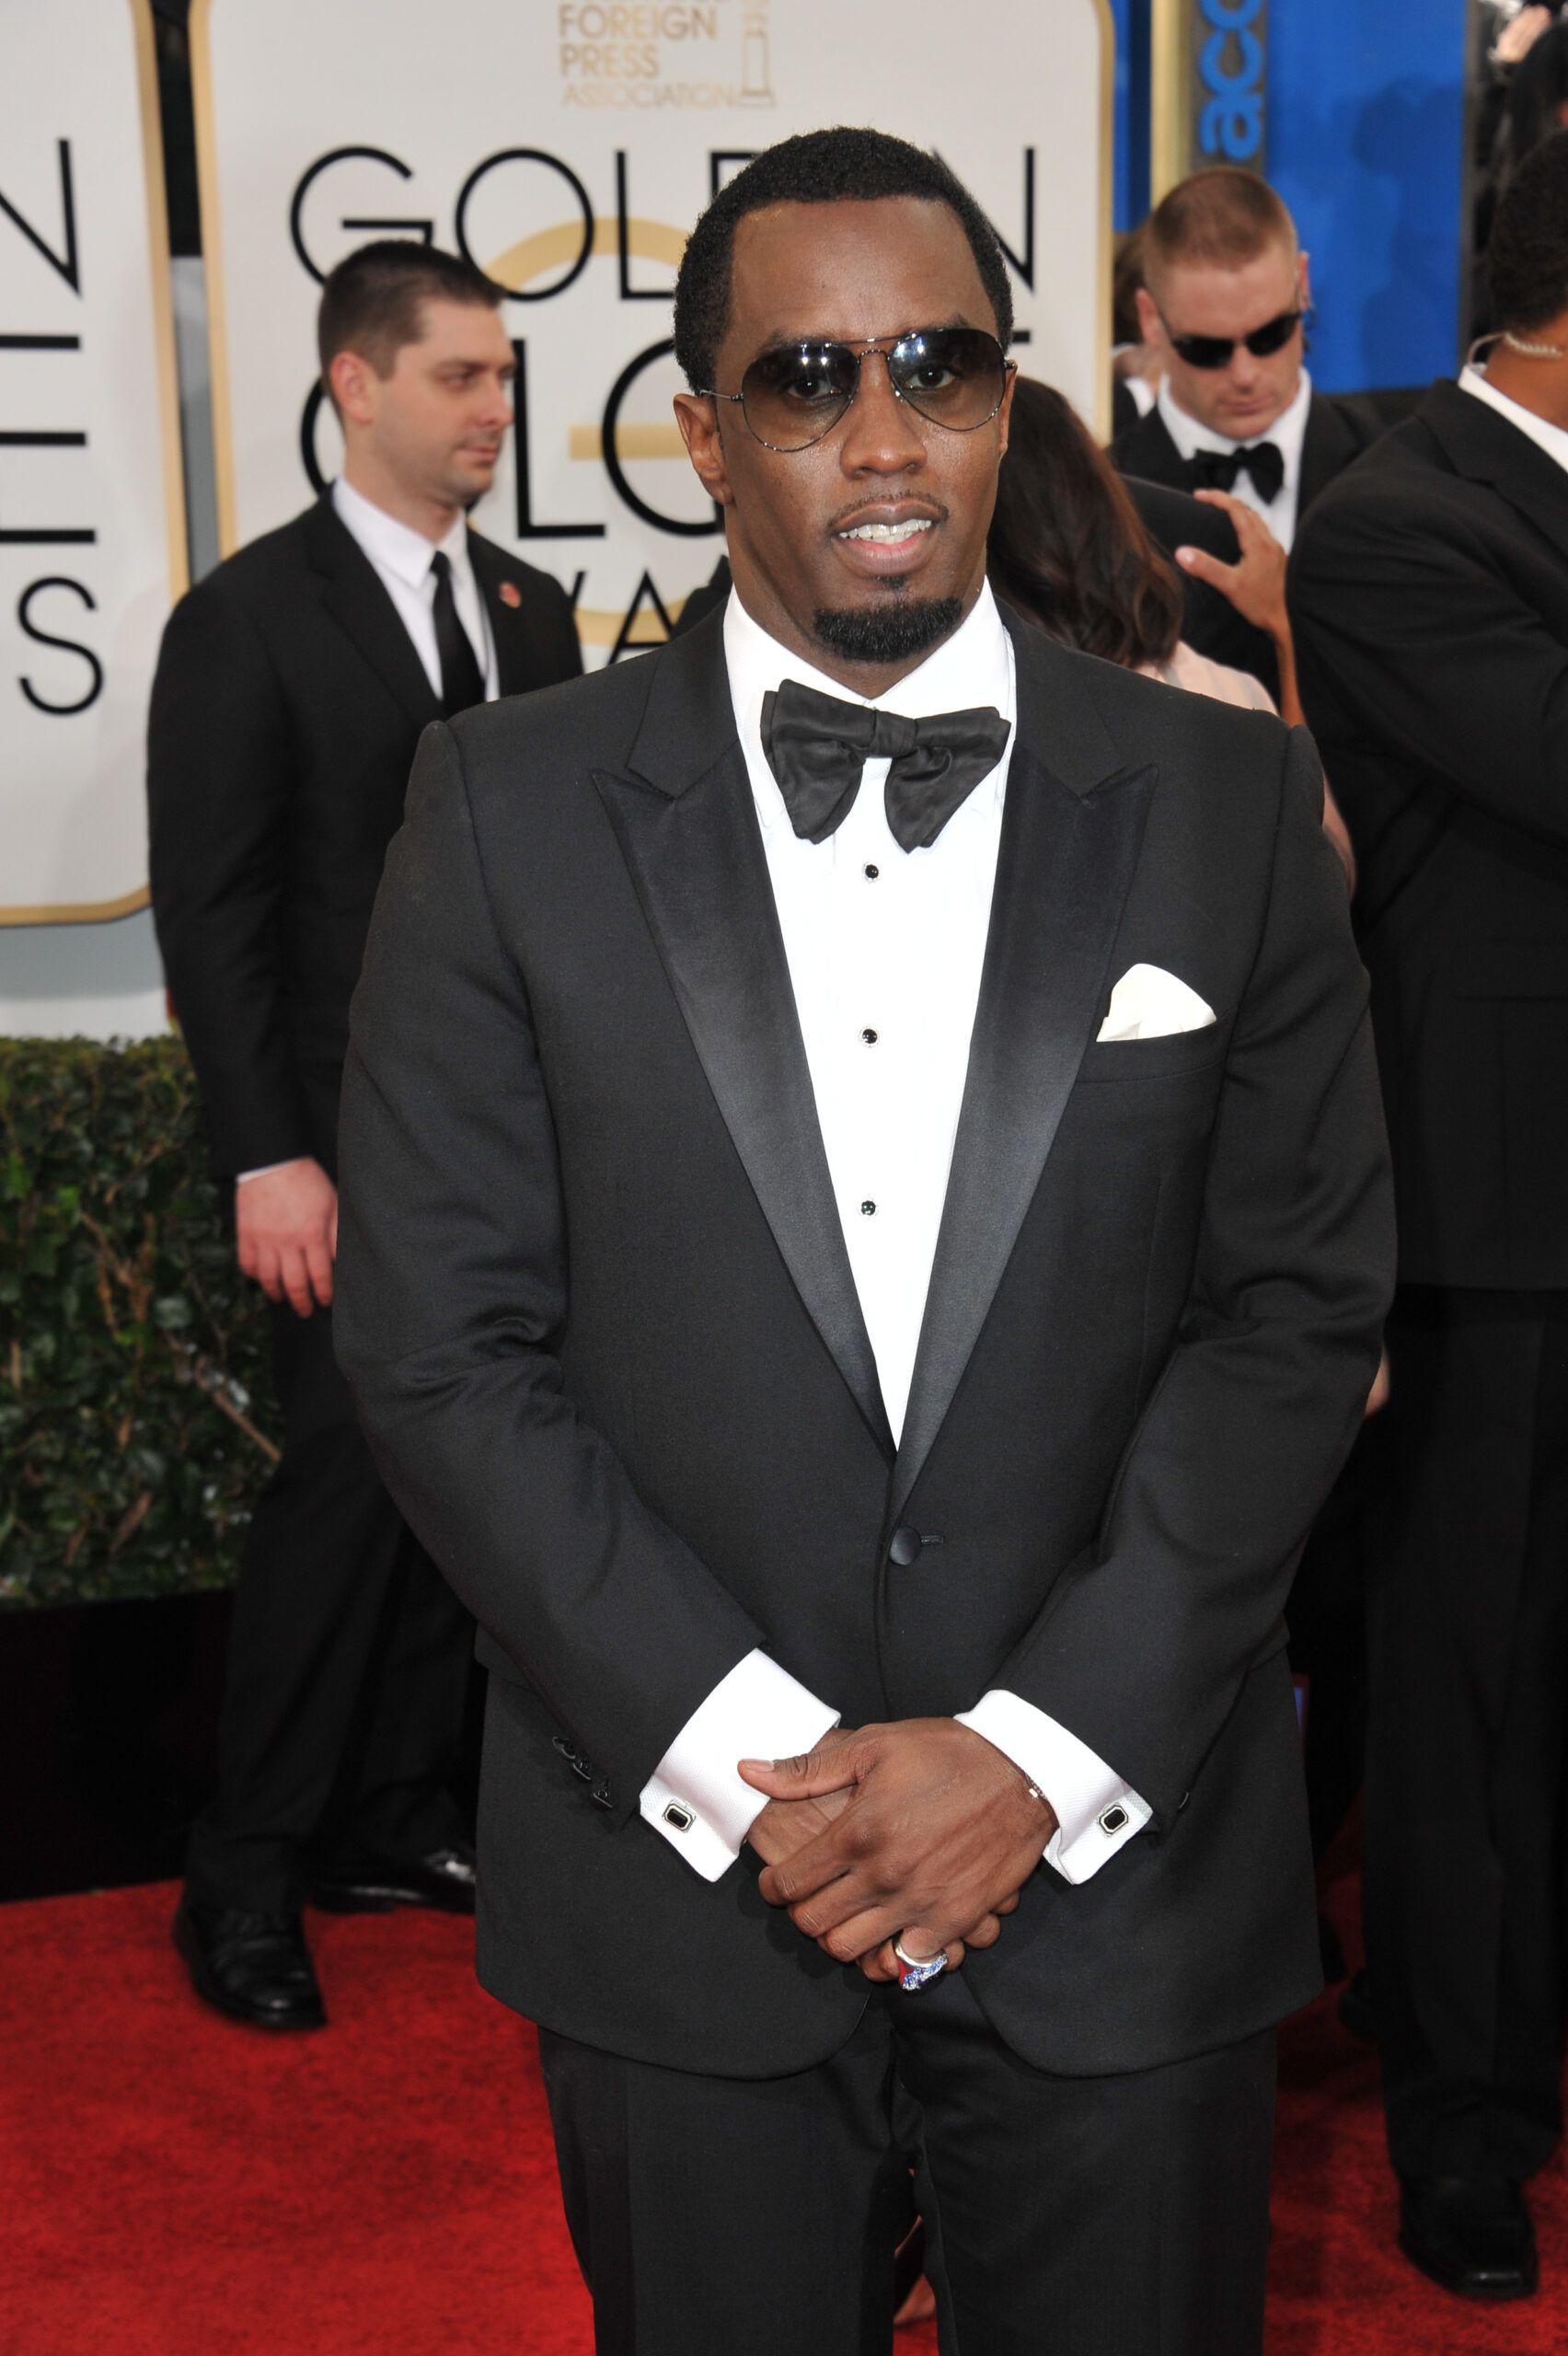 Sean "Diddy" Combs has been accused of sexual assault by various women. Credit: Shutterstock.com